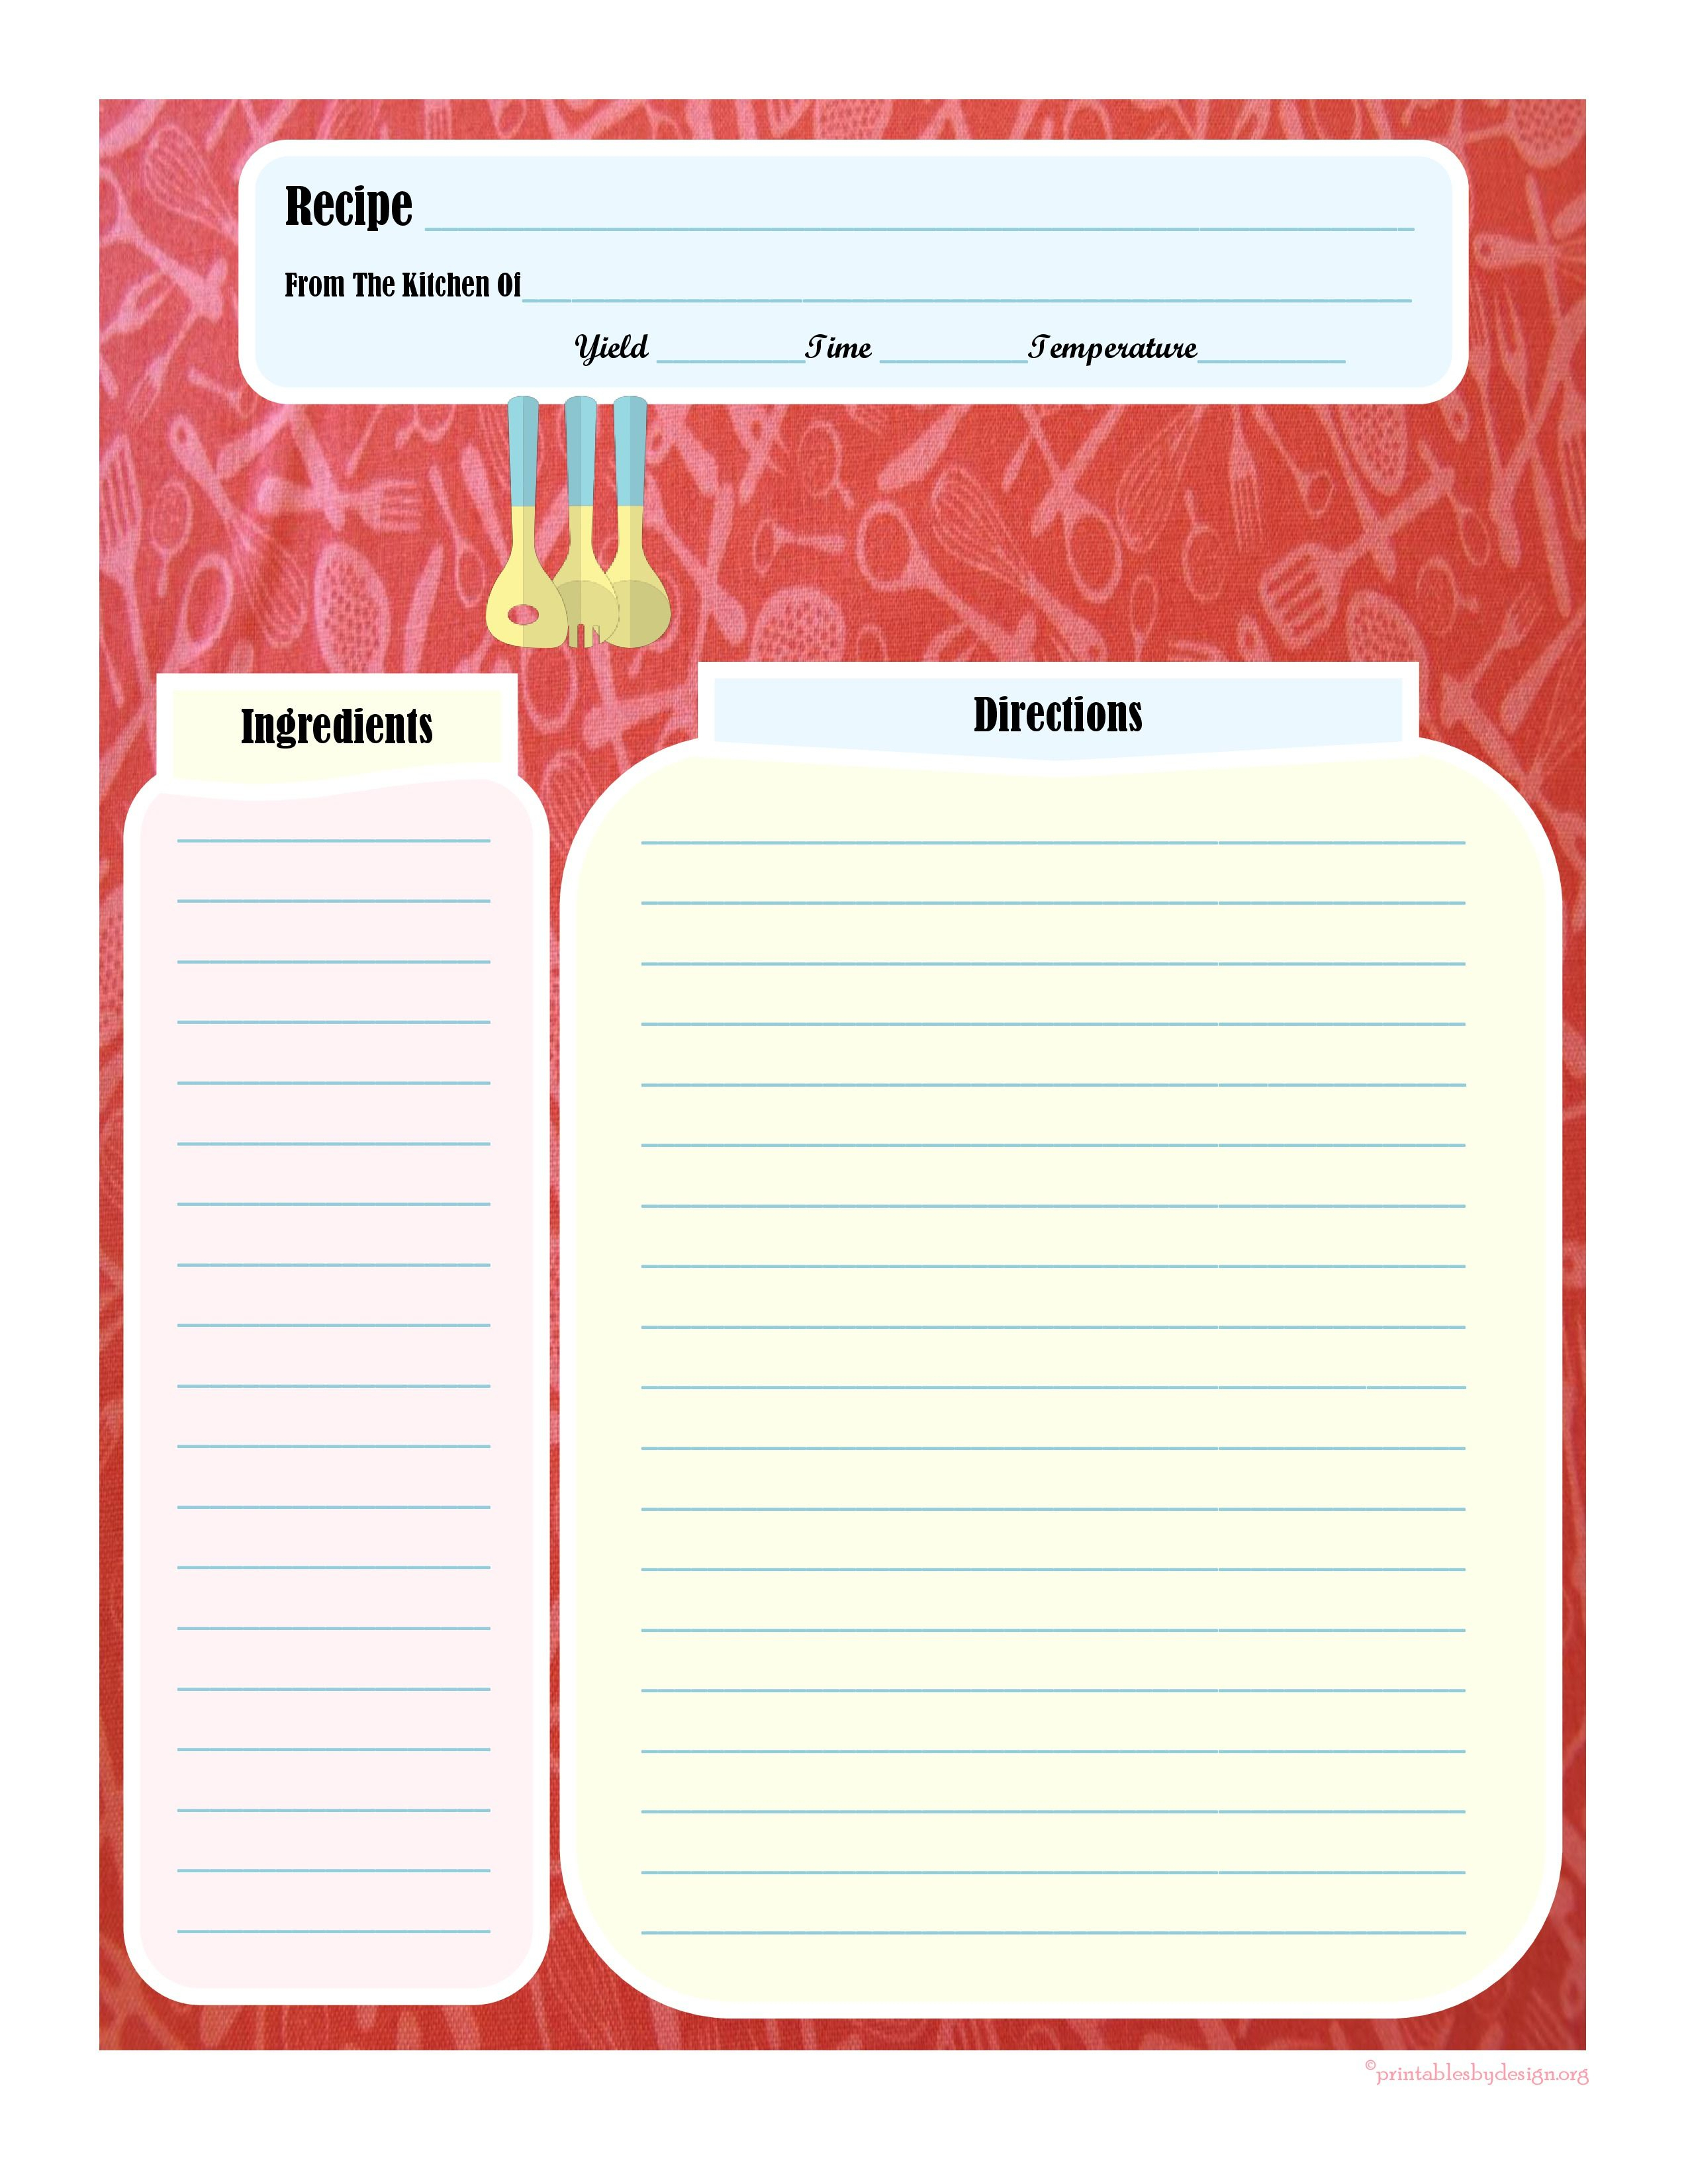 Full Page Recipe Card | Printable Recipe Cards, Family In Recipe Card Design Template